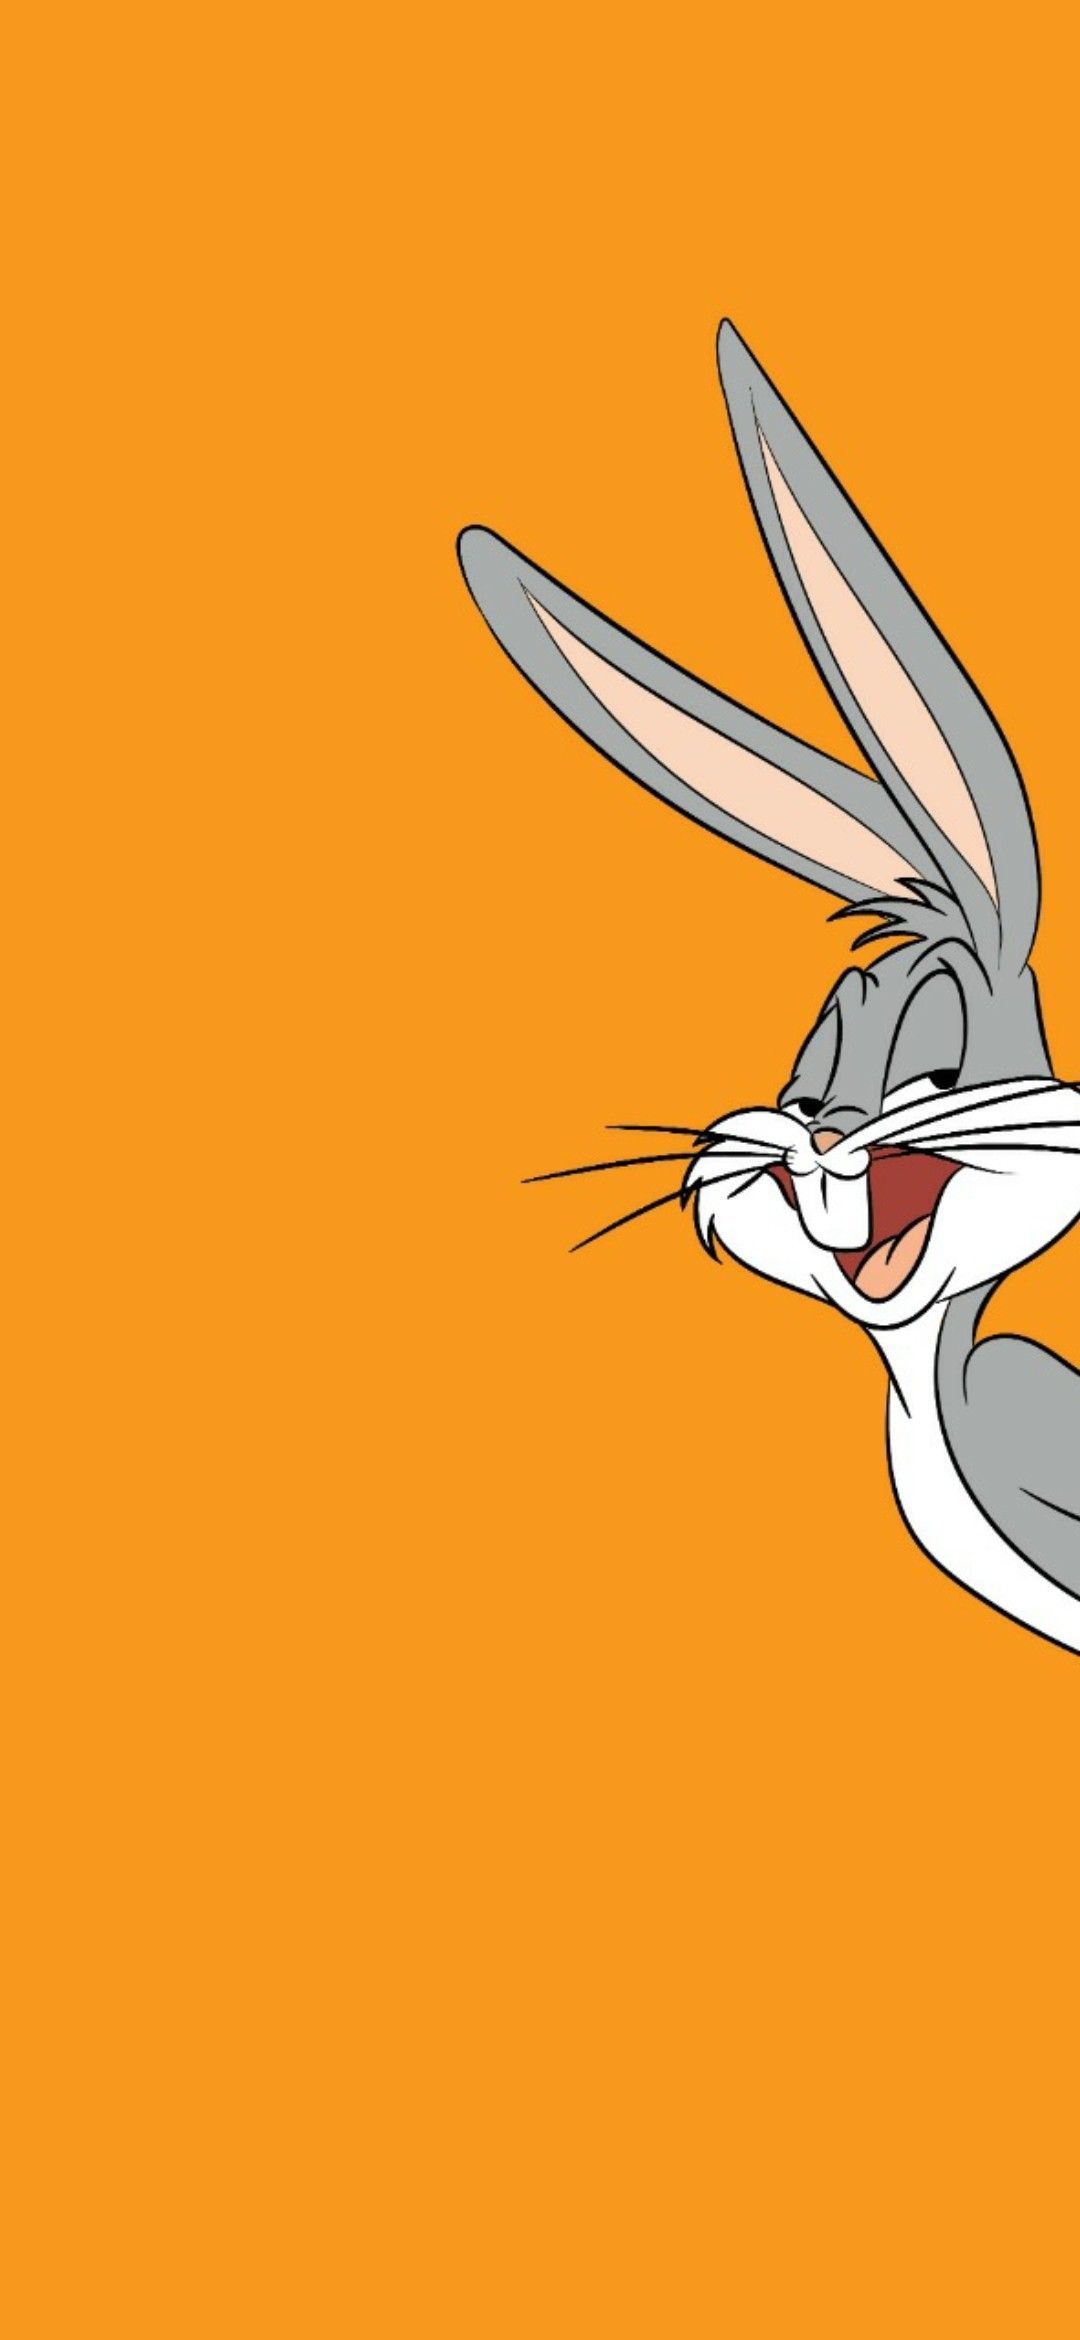 The looney tunes character bugs is shown on an orange background - Bugs Bunny, Looney Tunes